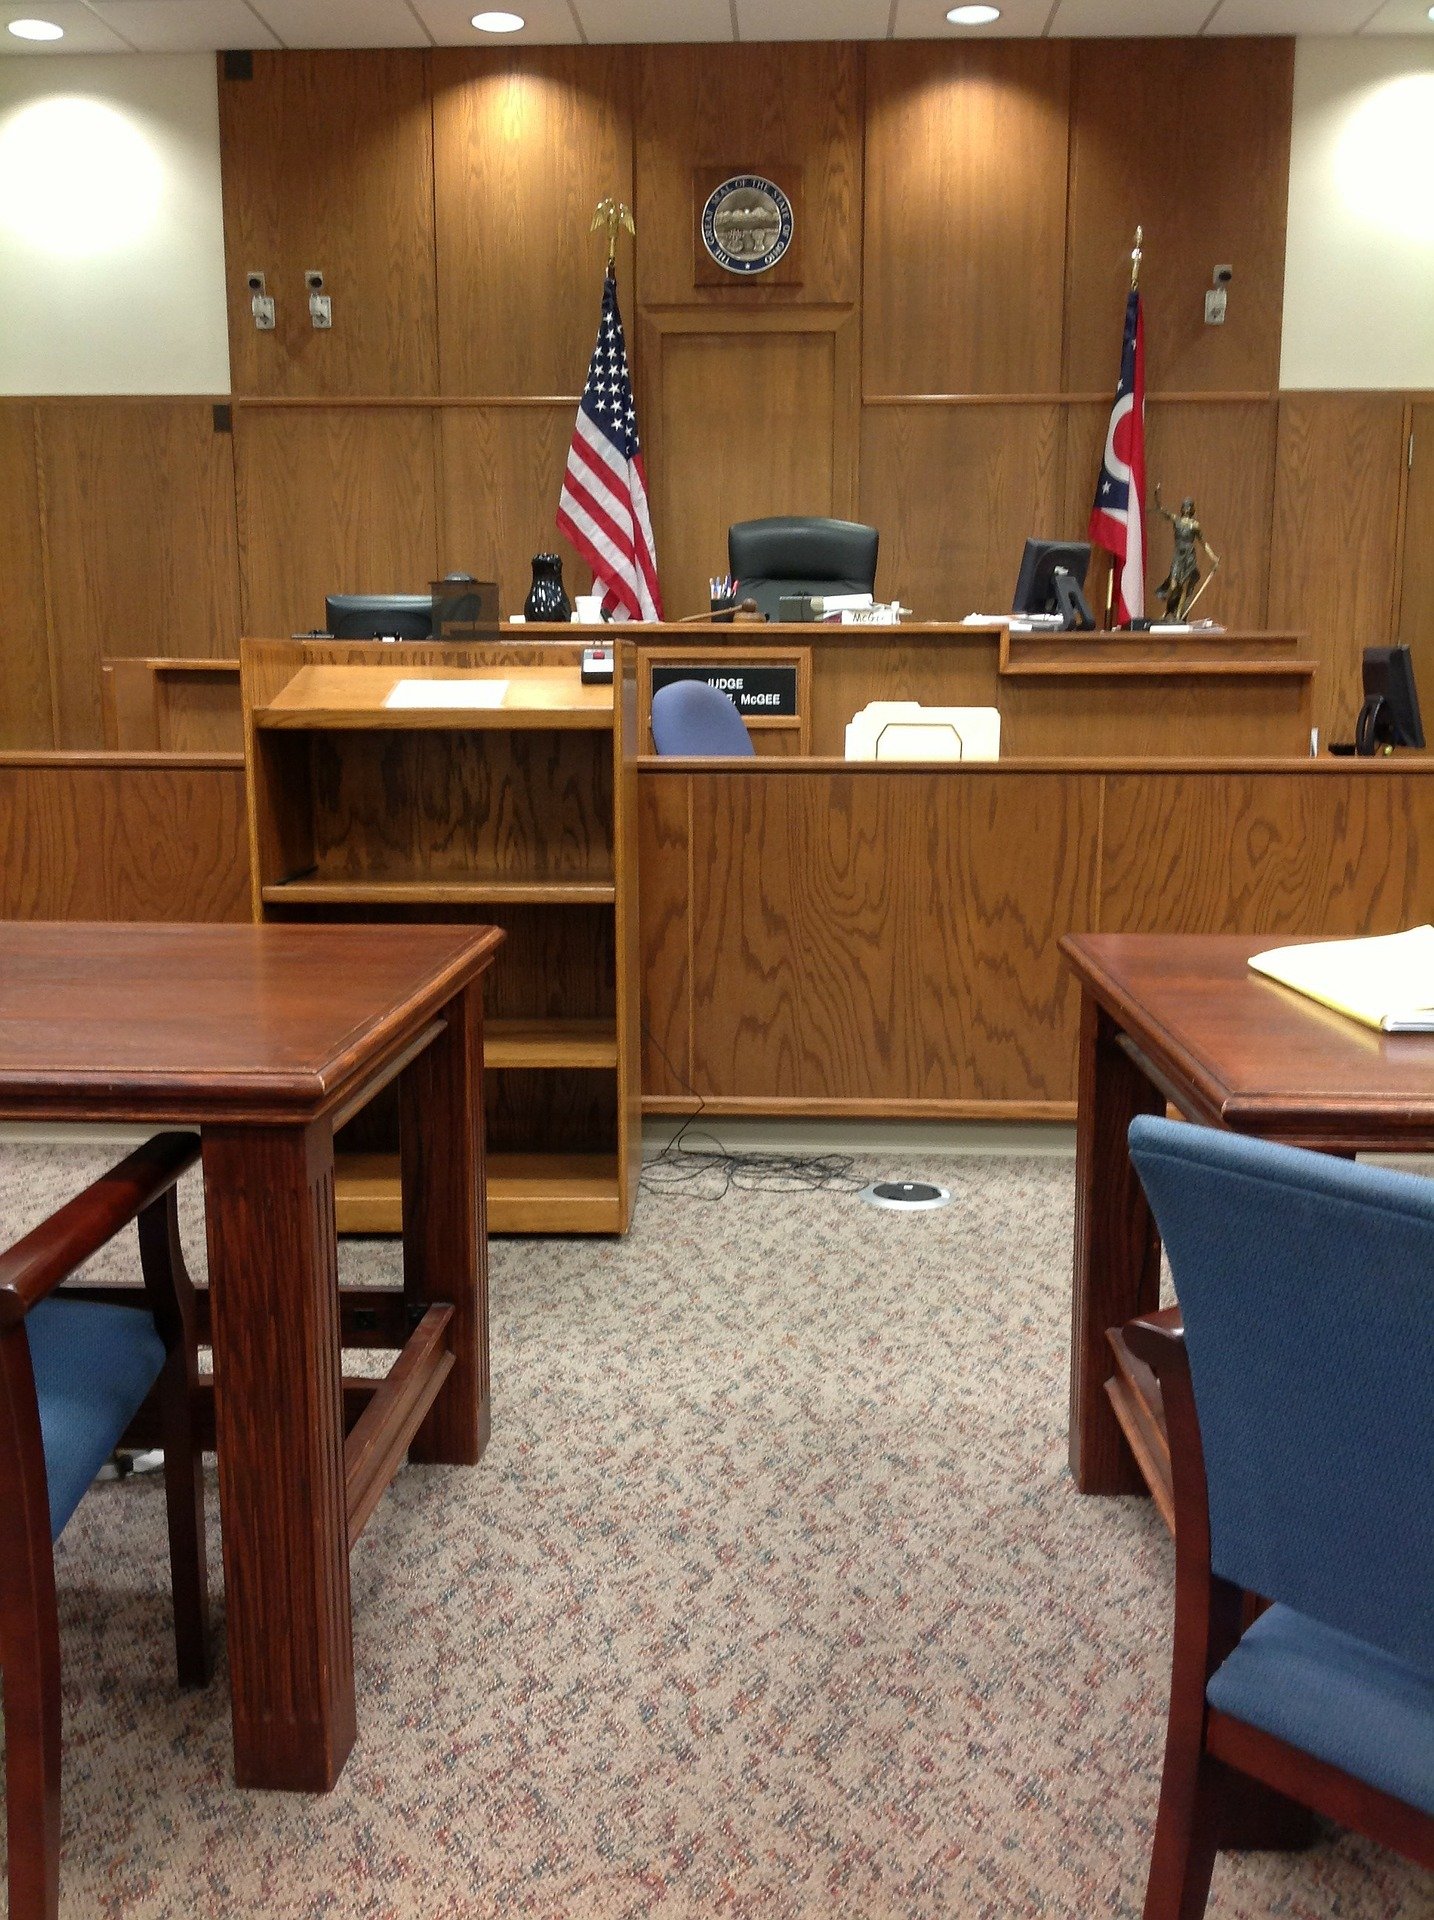 A view of a chairman’s bench in an American courtroom | Photo: Pixabay/ohioduidefense